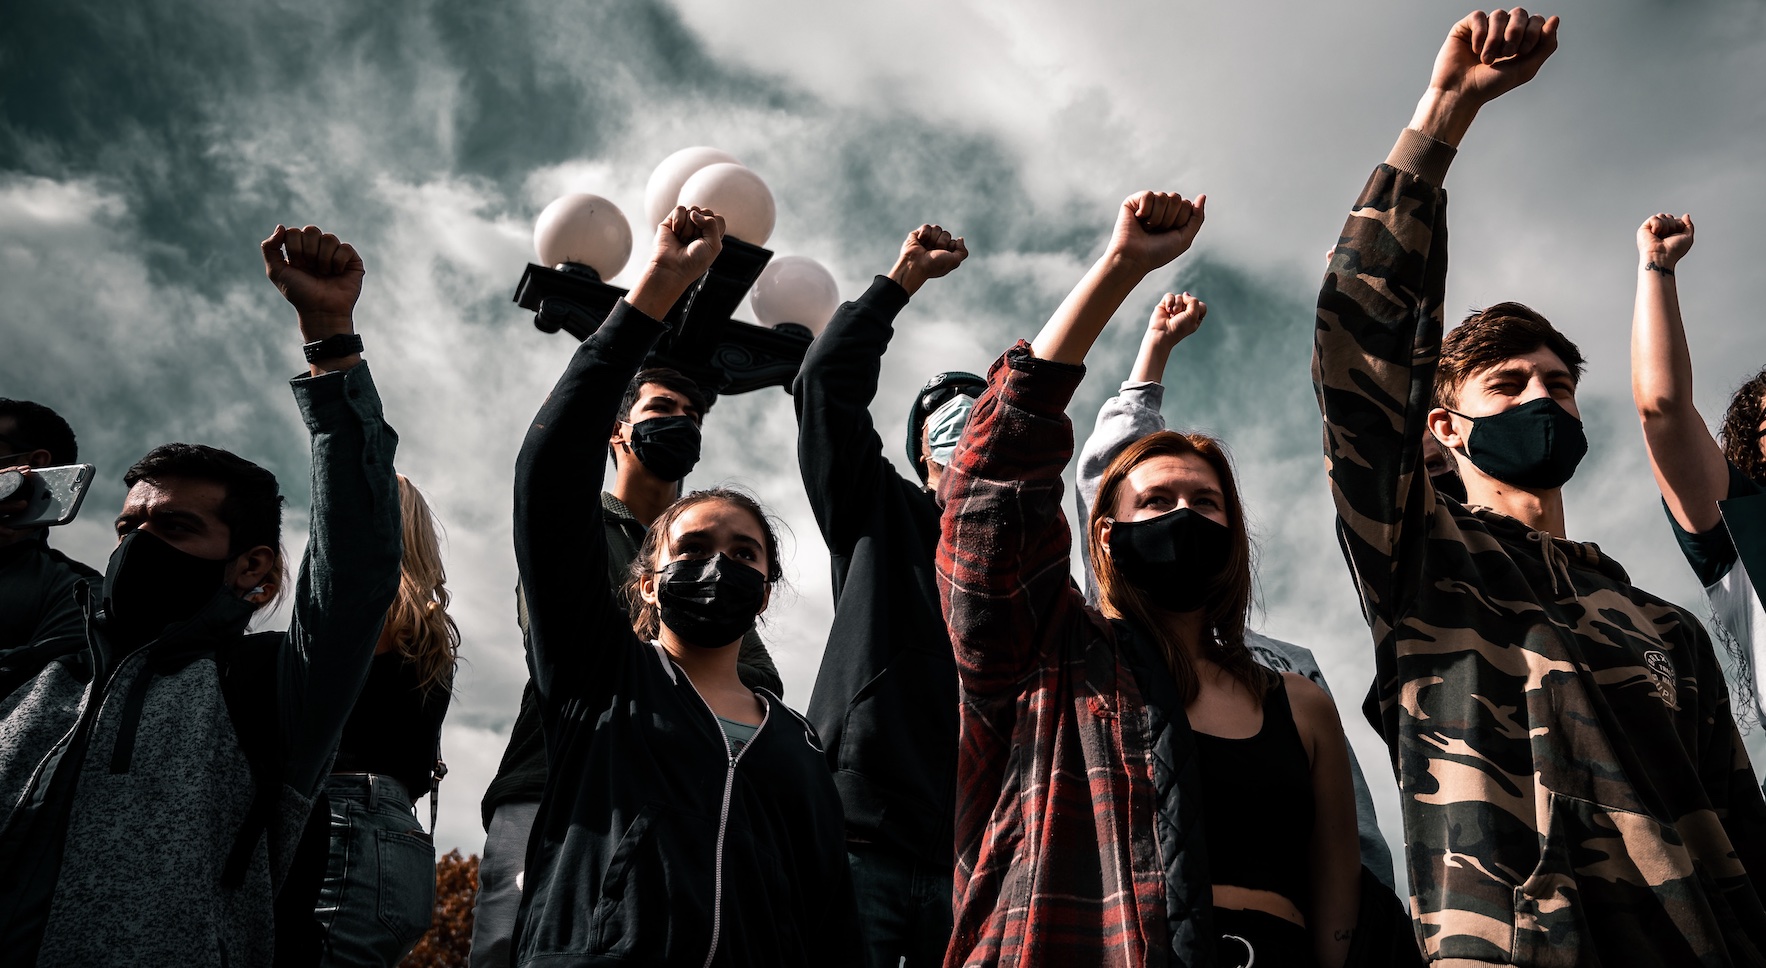 Group of people with raised fists.